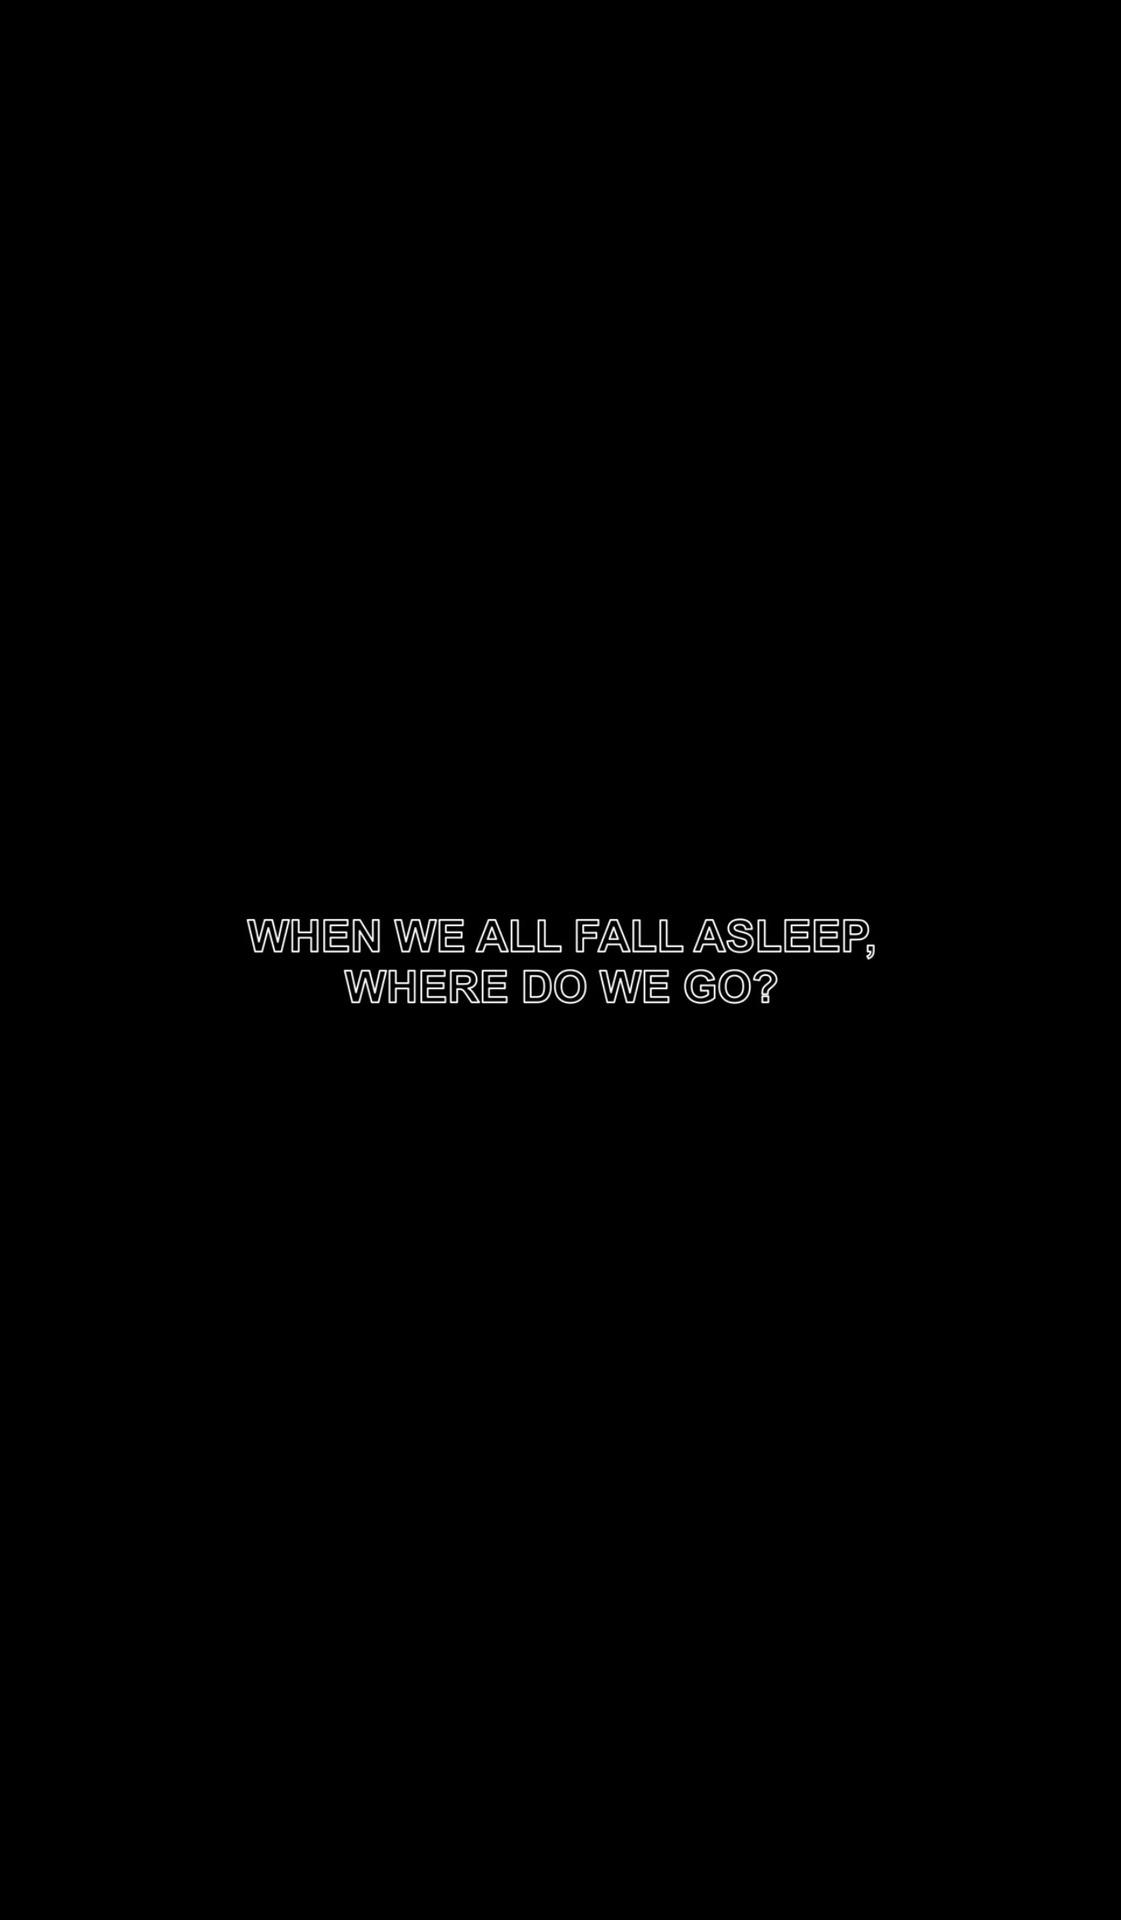 When We All Fall Asleep, Where Do We Go Album Cover Hd Wallpapers